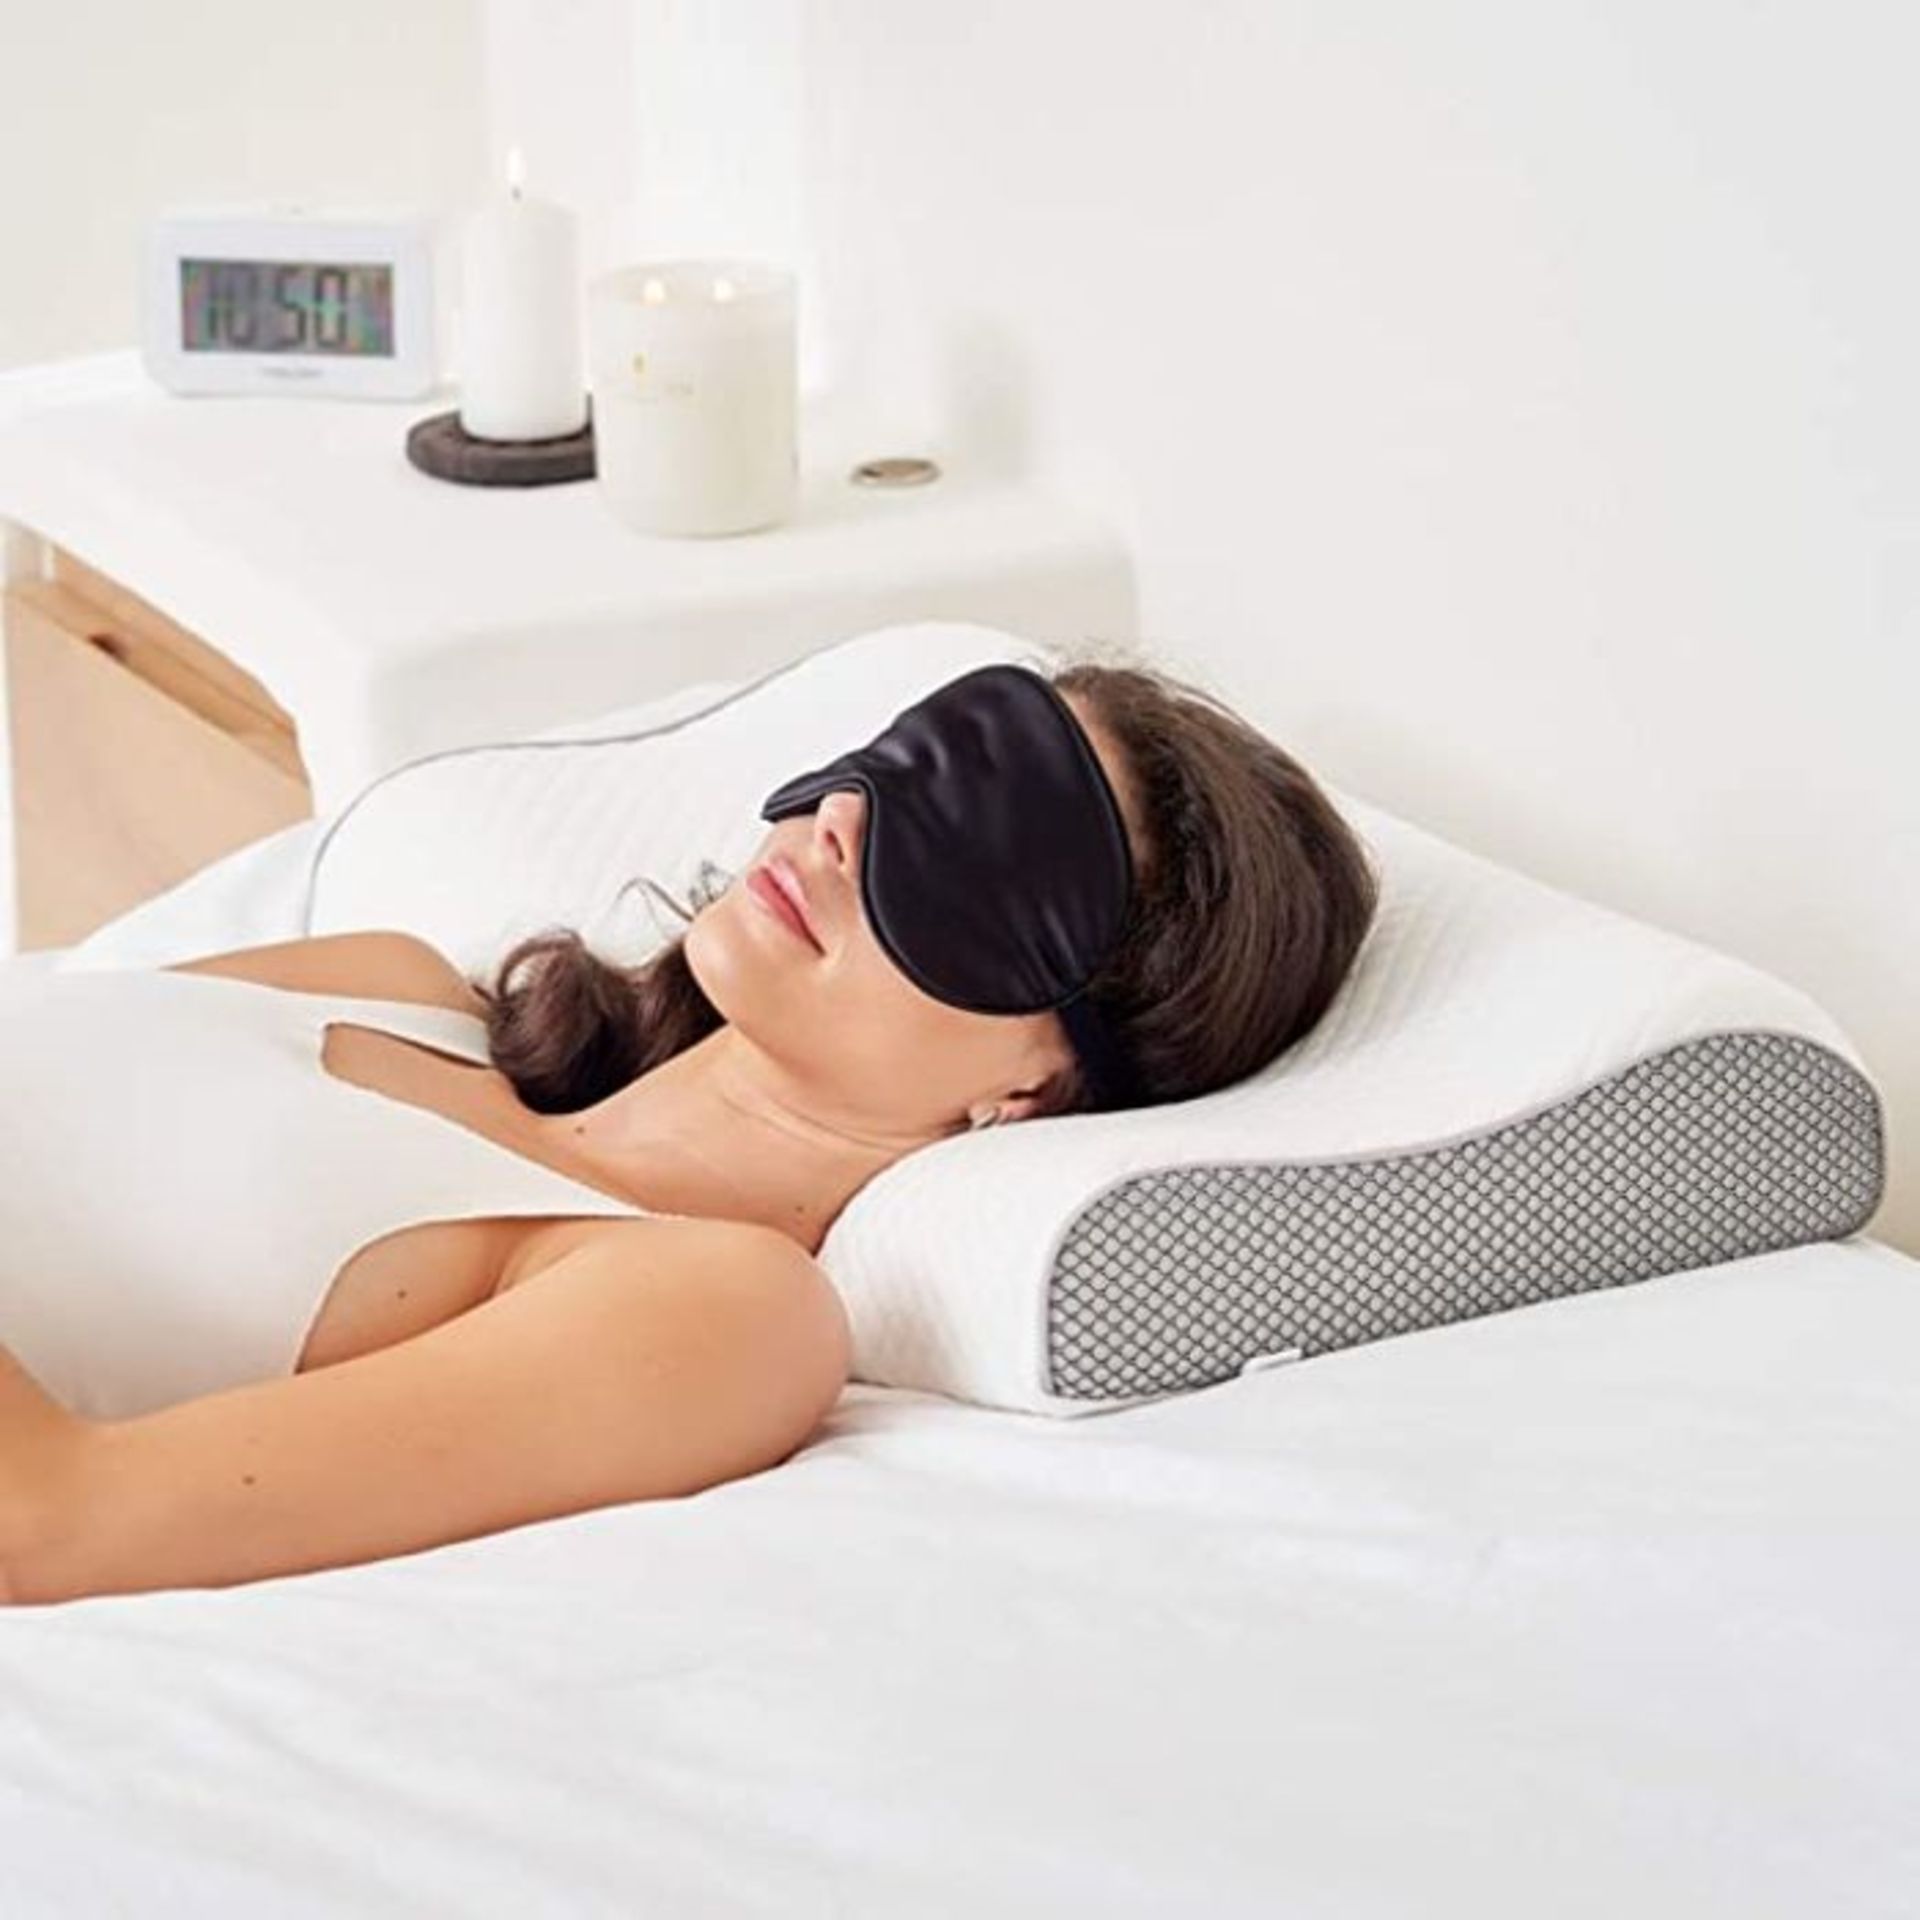 ComfyCozy Luxury Memory Foam Pillow And Silk Eye Mask | Orthopedic Support For Neck Shoulder - Image 2 of 2